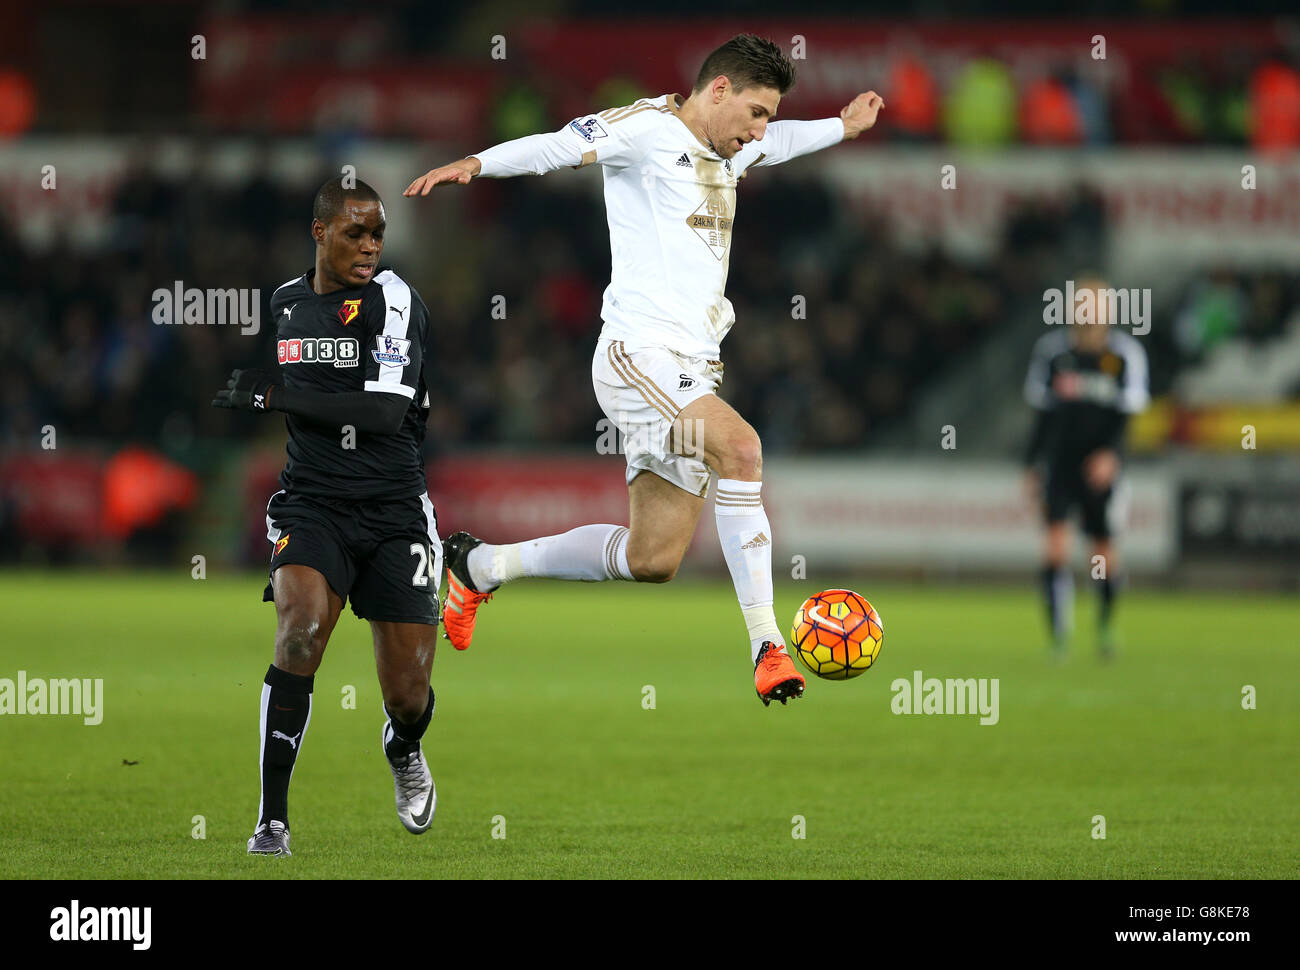 Swansea City v Watford - Barclays Premier League - Liberty Stadium. Watford's Odion Ighalo (left) and Swansea City's Federico Fernandez in action Stock Photo